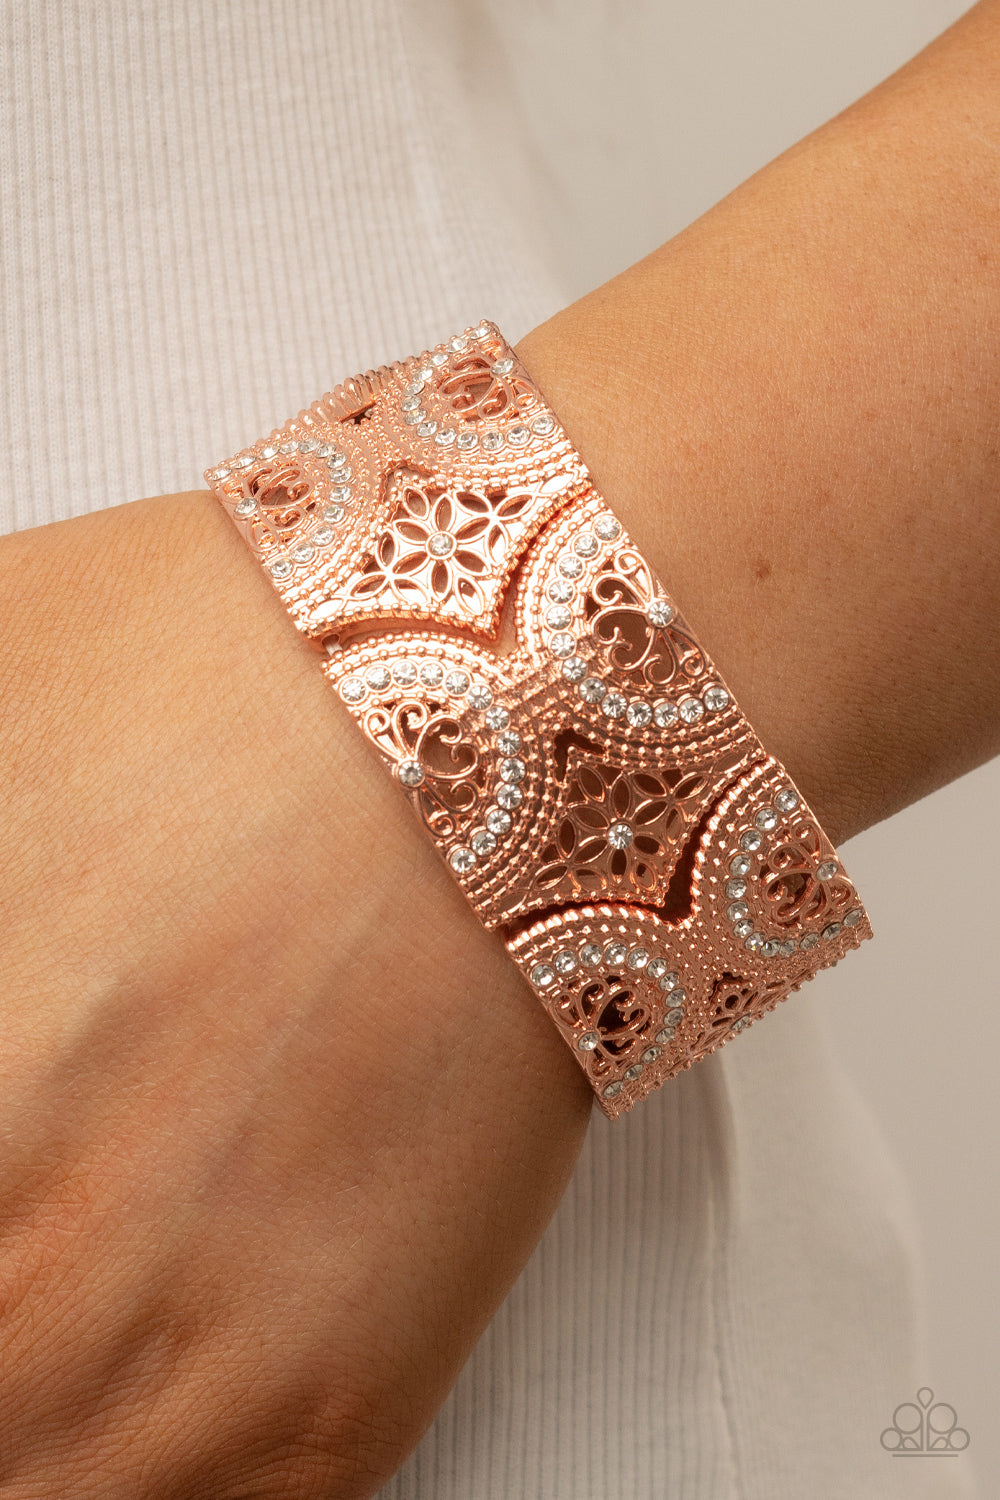 Dotted with sections of glassy white rhinestones, an immaculate display of studded wheel and floral shiny copper patterns combines into shimmering frames along stretchy bands around the wrist for a regal flair.